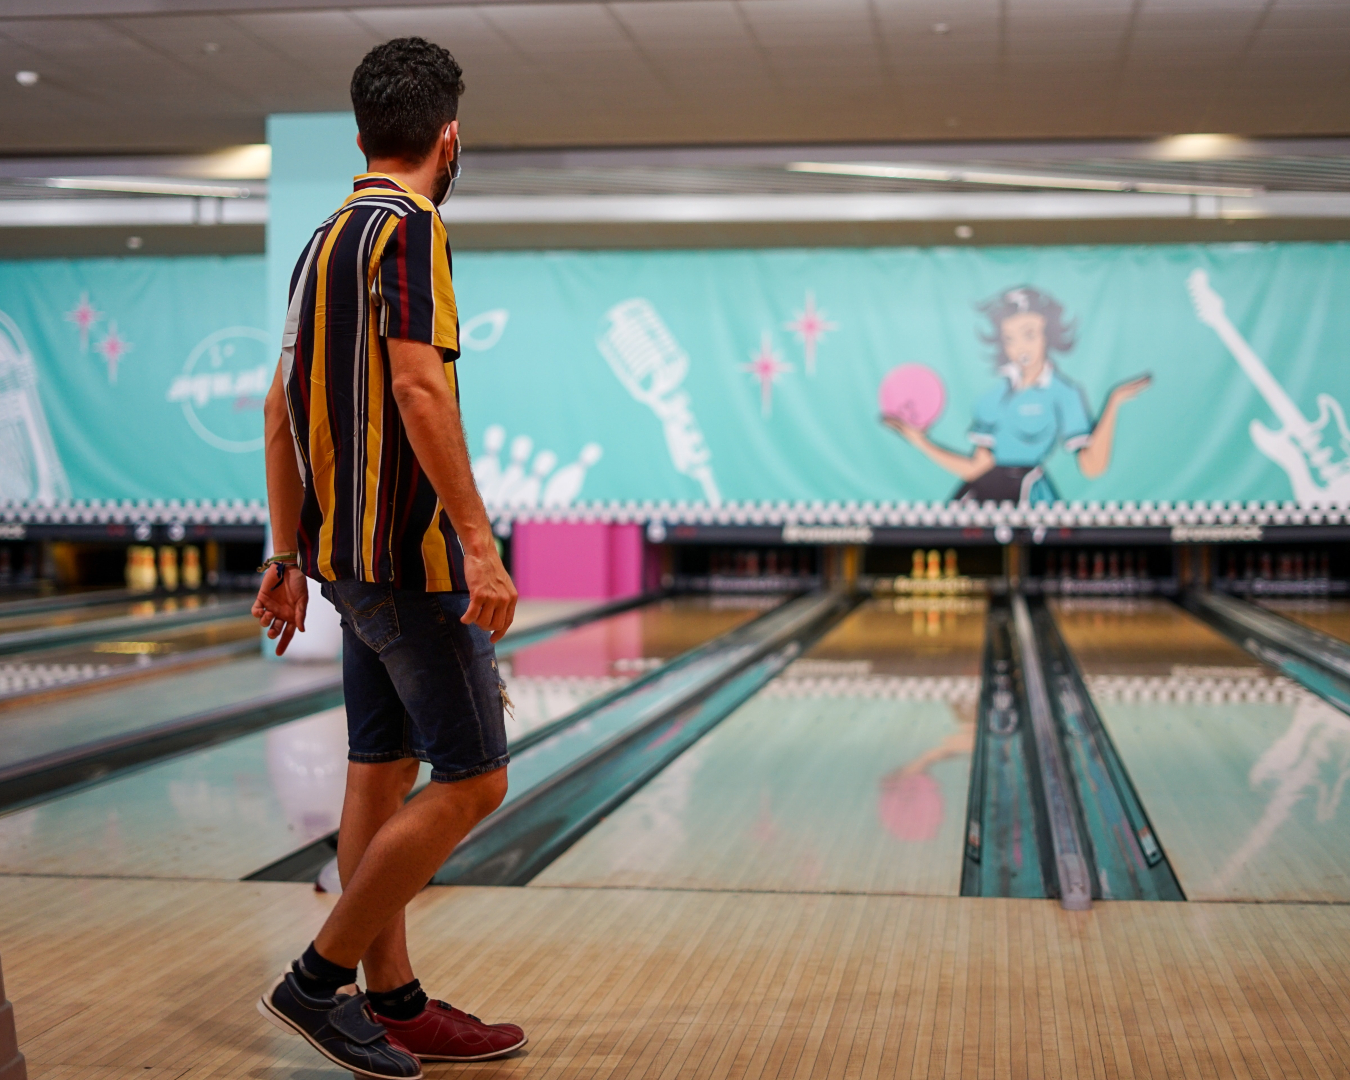 The bright lights and shiny floors of the bowling alley are showcased as a man steps up to bowl